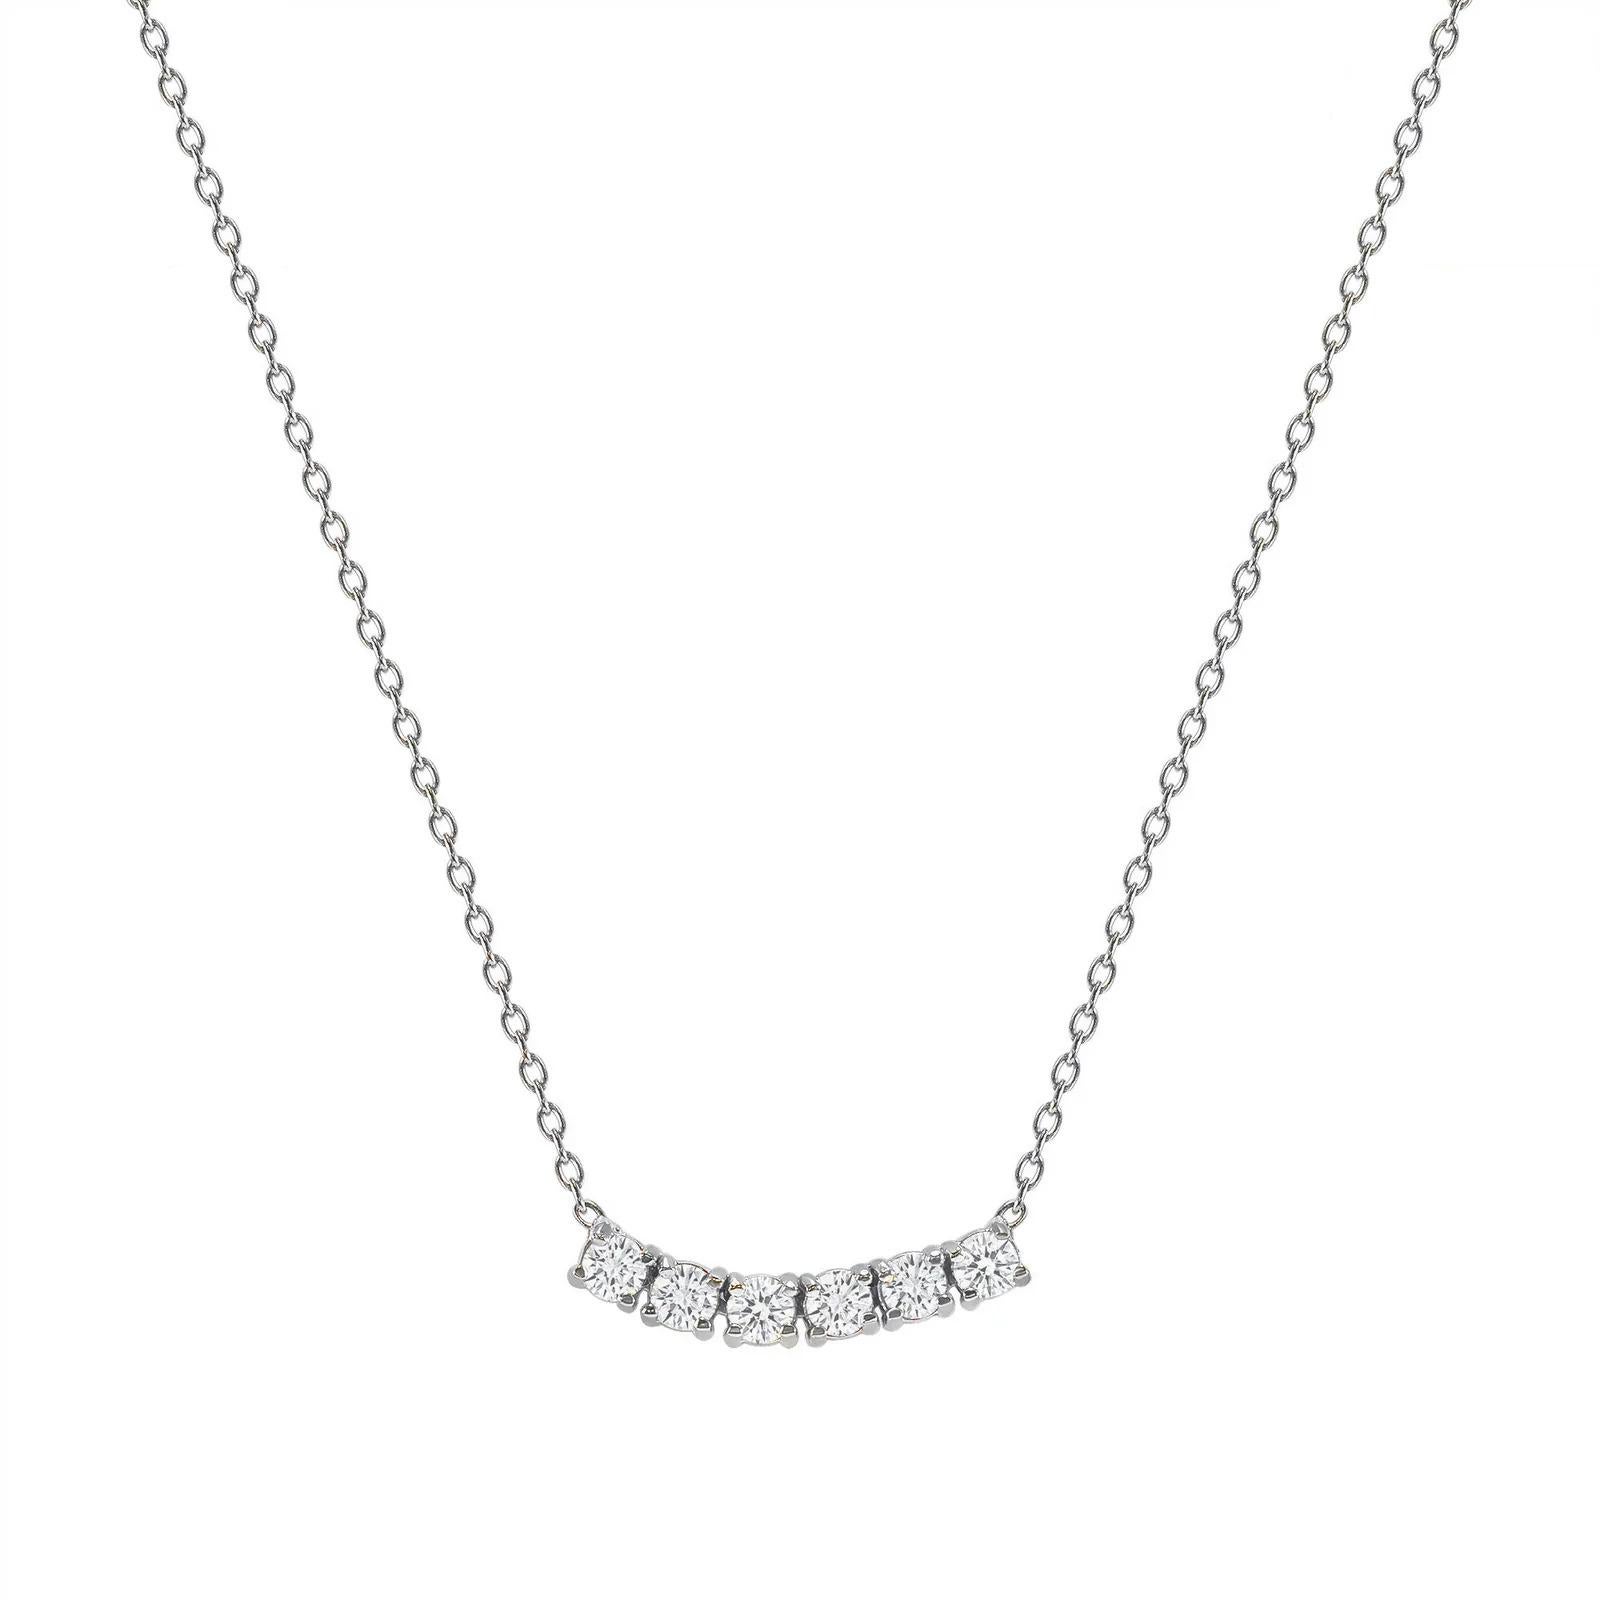 This petite, curved diamond necklace is crafted with gorgeous 14k gold set with six round diamonds.  

Gold: 14k 
Diamond Total Carats: 0.75ct
Diamond Cut: Round (6 diamonds)
Diamond Clarity: VS
Diamond Color: F
Color: White Gold
Necklace Length: 20